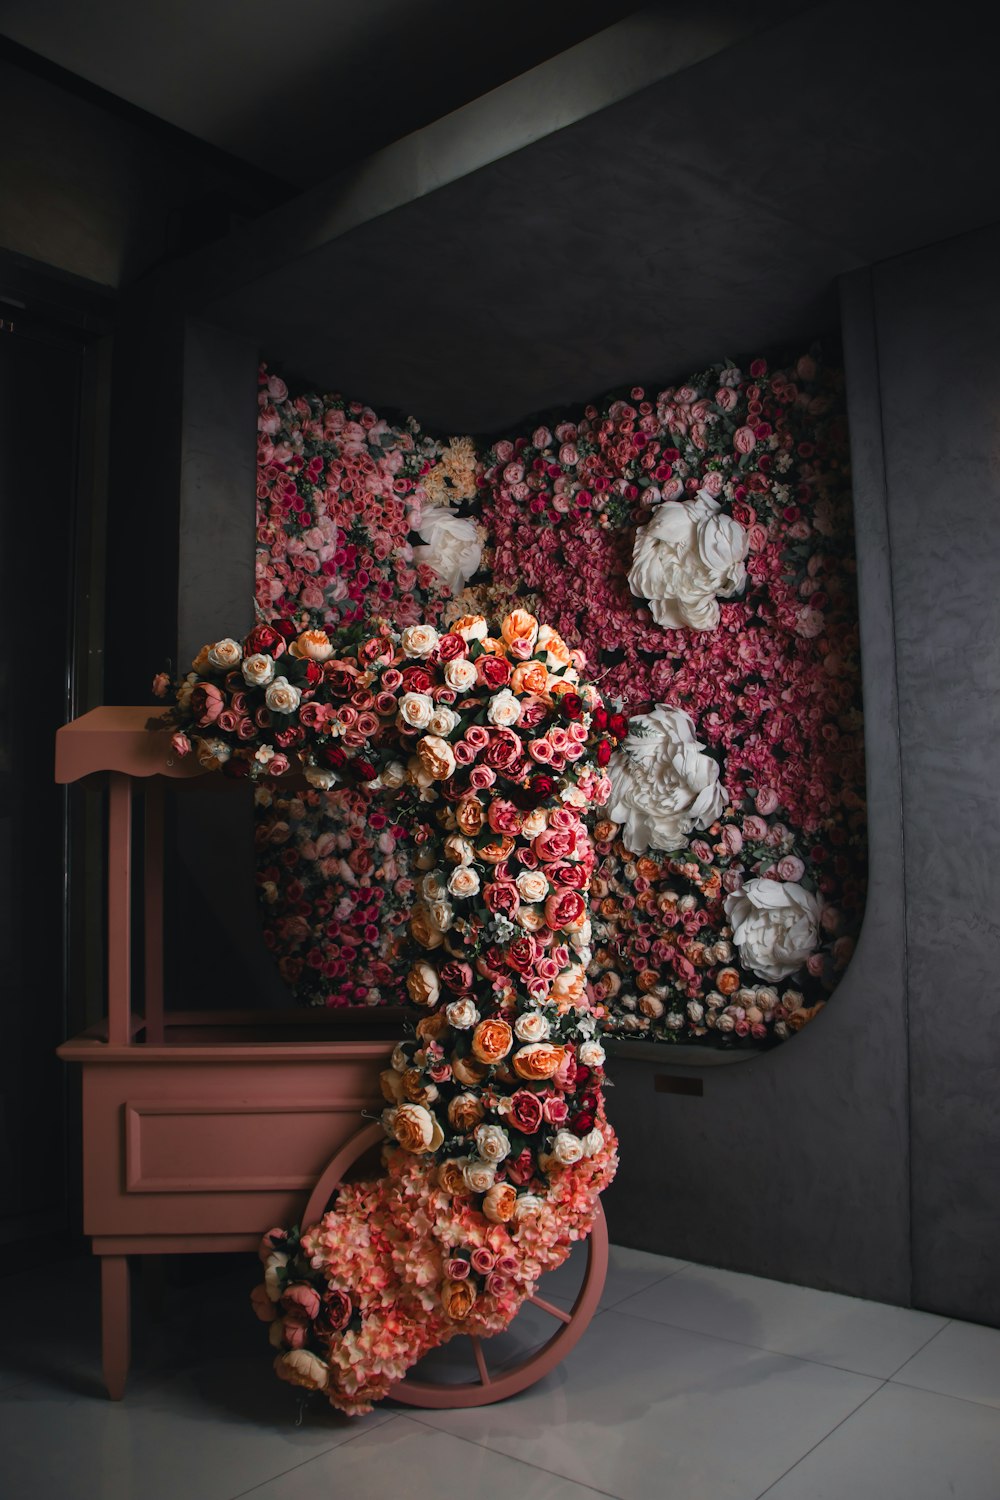 a sculpture of a person made out of flowers